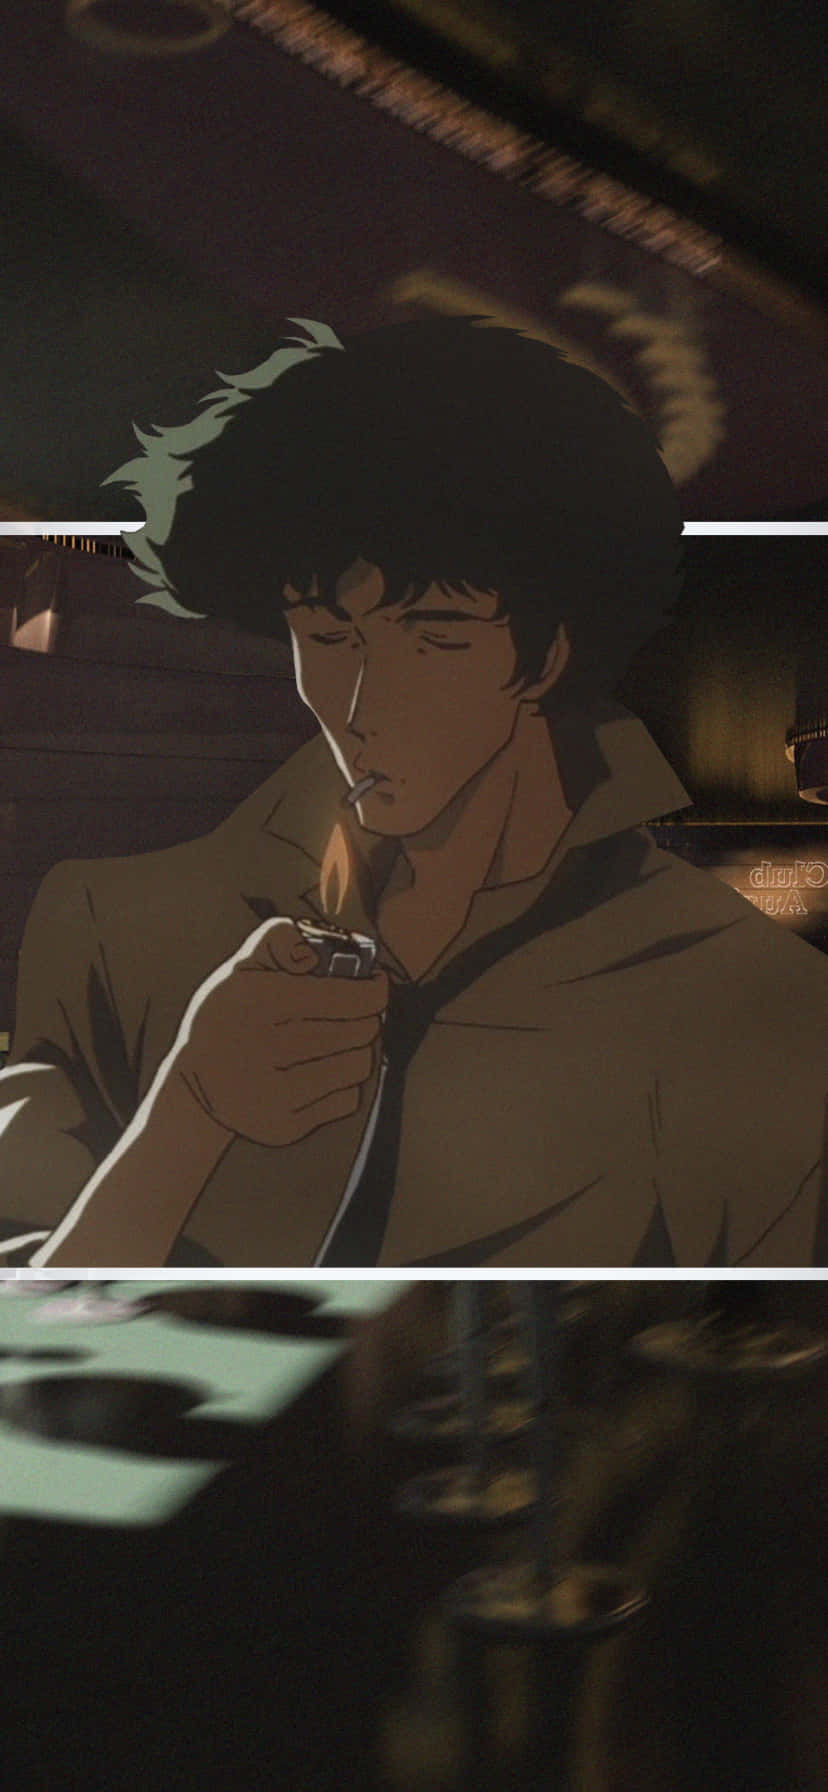 Keep up with Cowboy Bebop on your Iphone! Wallpaper